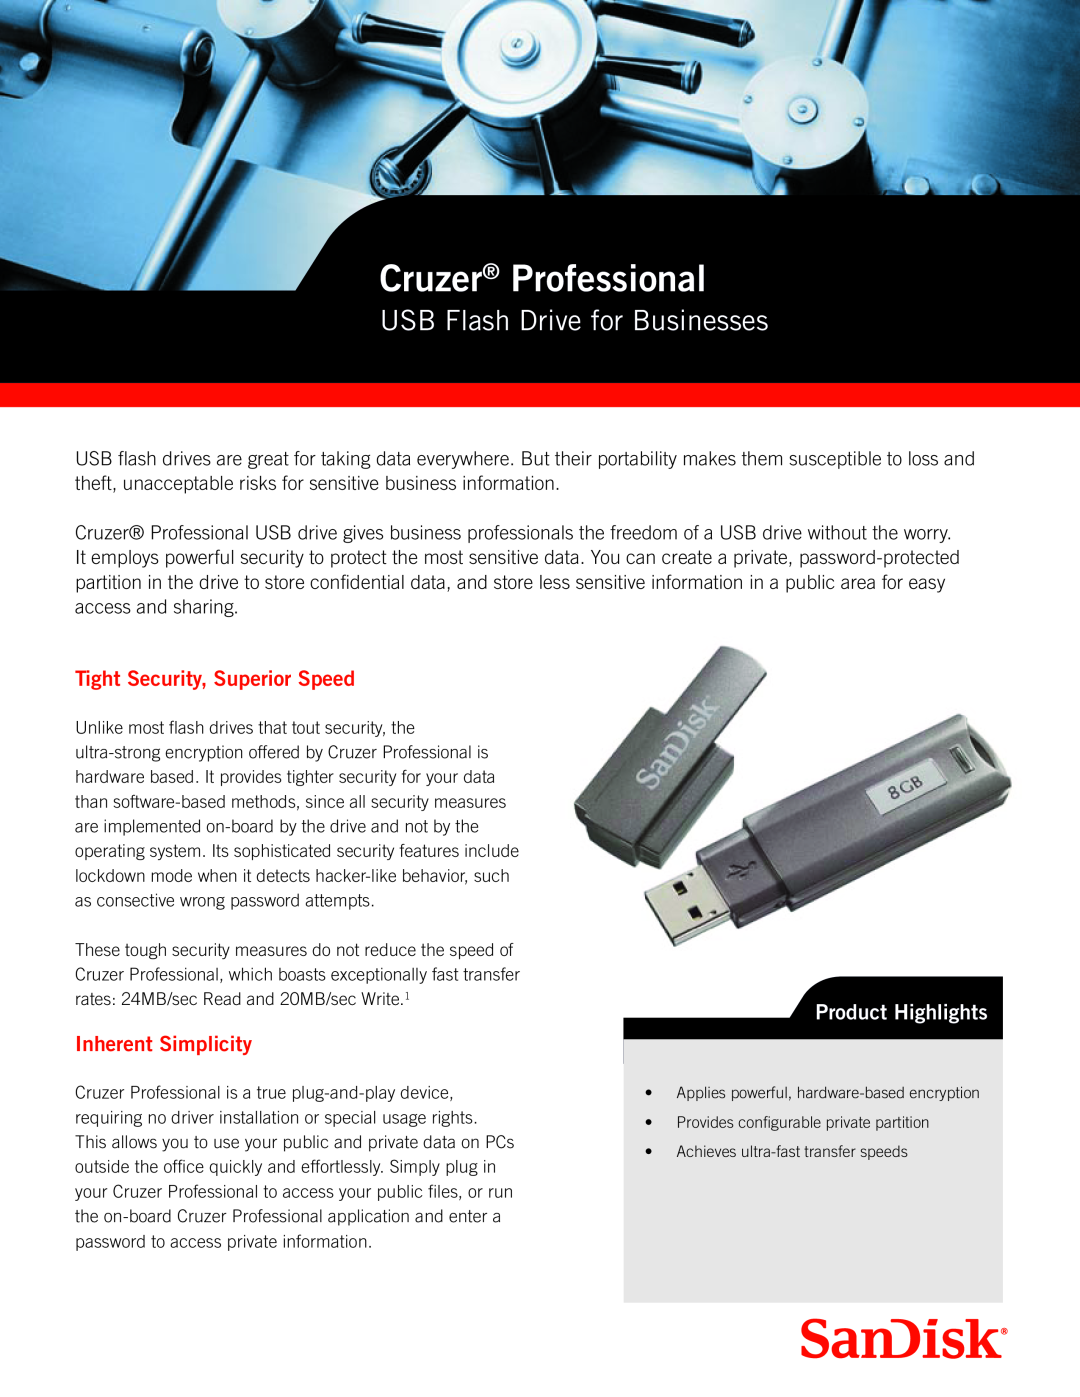 SanDisk 80-11-01546 manual Cruzer Professional, USB Flash Drive for Businesses, Tight Security, Superior Speed 